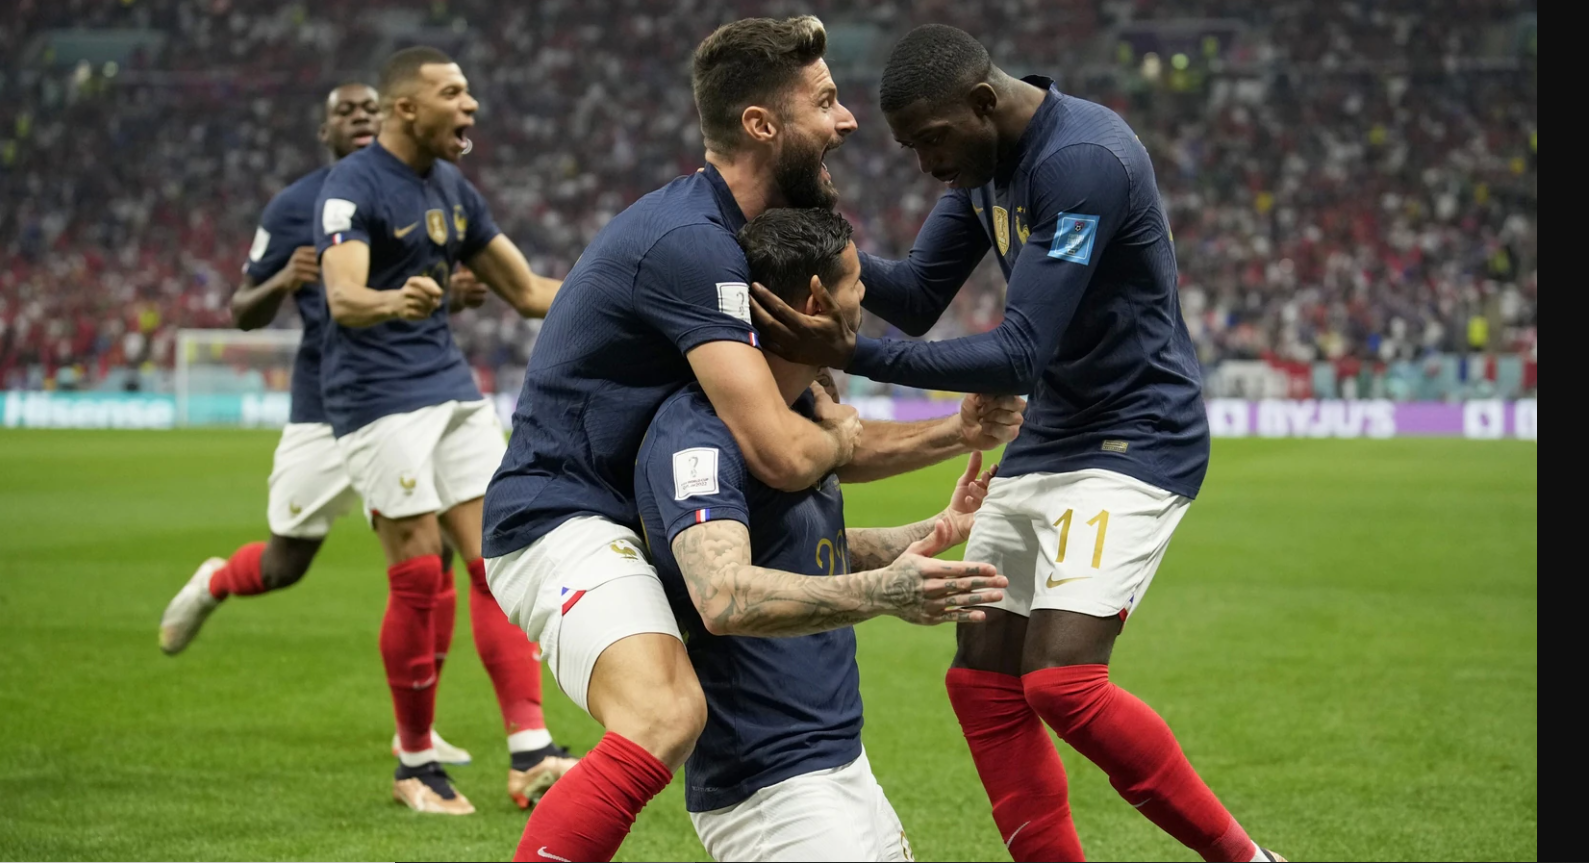 France made their way to their second consecutive World Cup final after they defeated Morocco 2-0 in a fantastic encounter at the Al Bayt Stadium